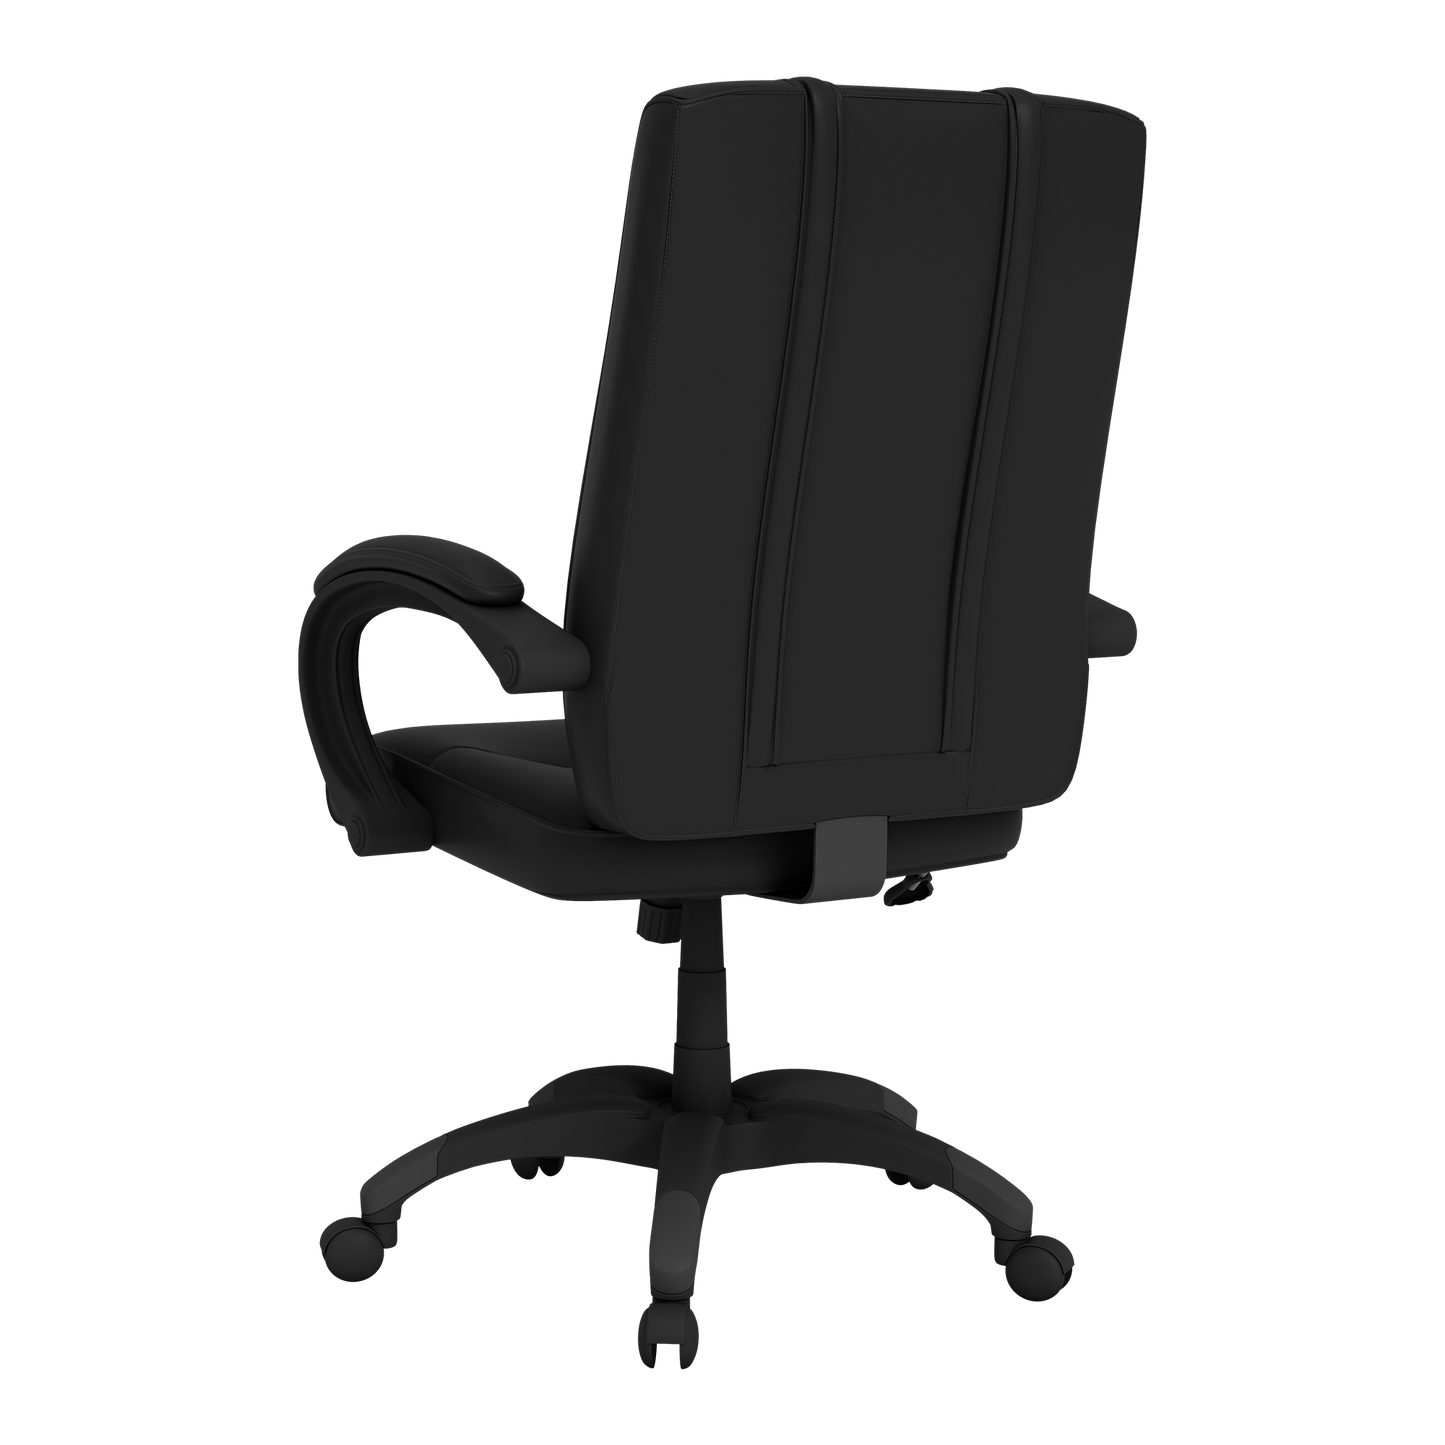 Office Chair 1000 with Georgia Southern GS Eagles Logo